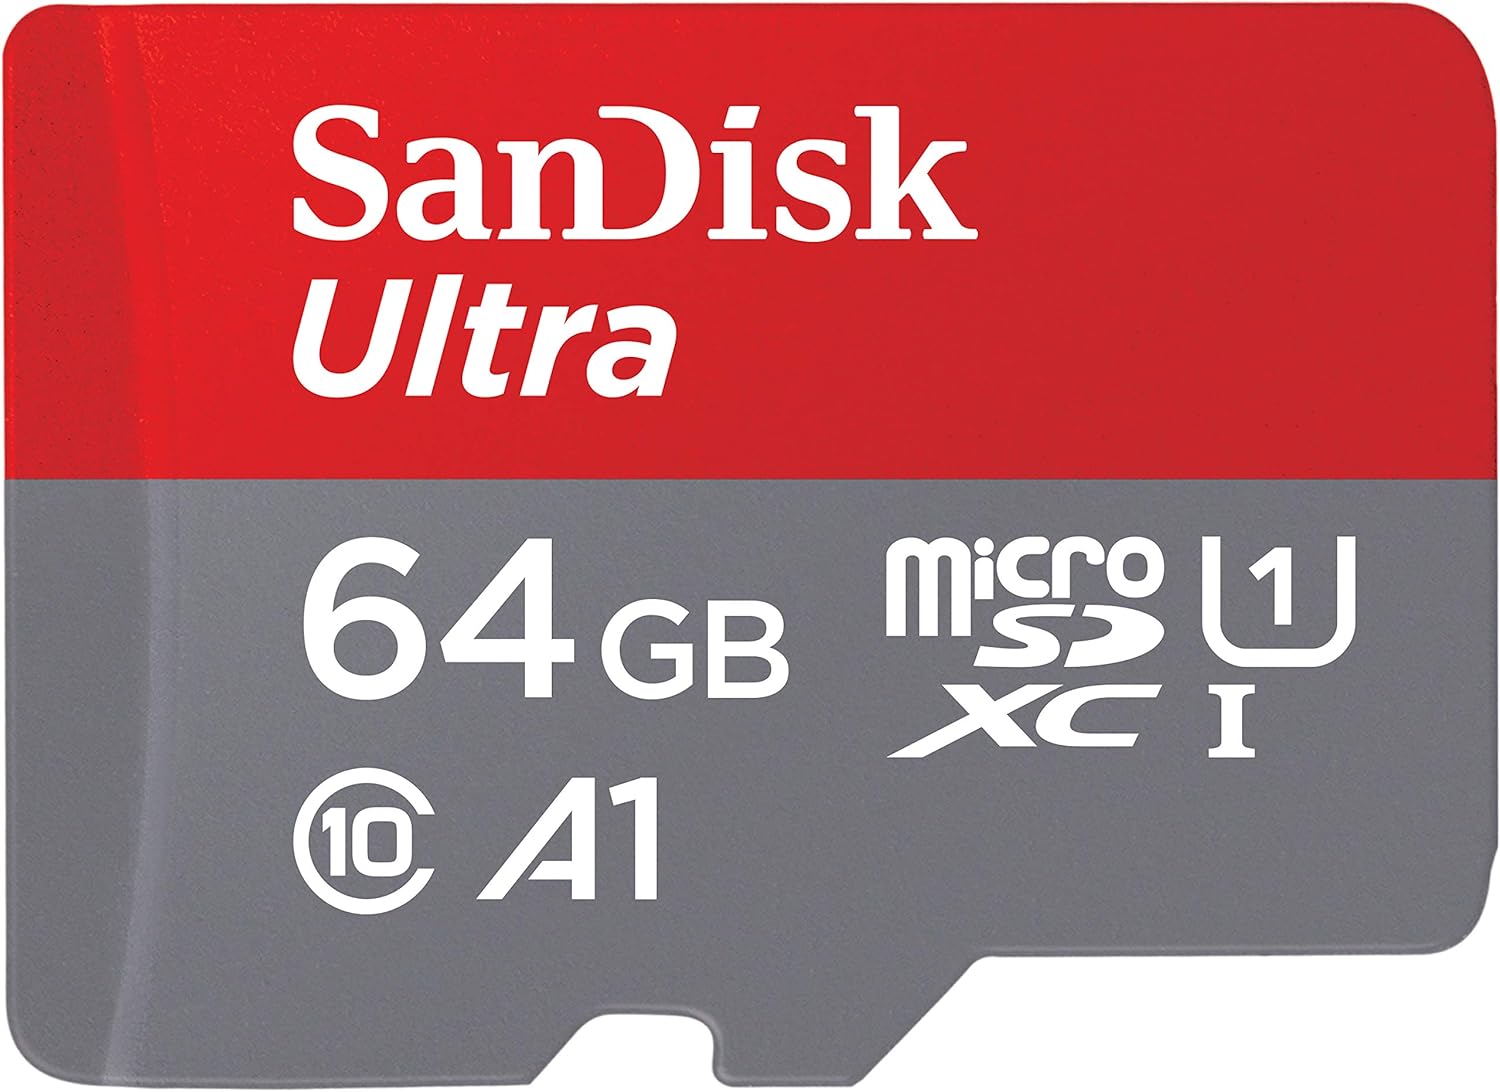 Sandisk ULTRA SD Class 10 Card - 140 MBPS 64GB